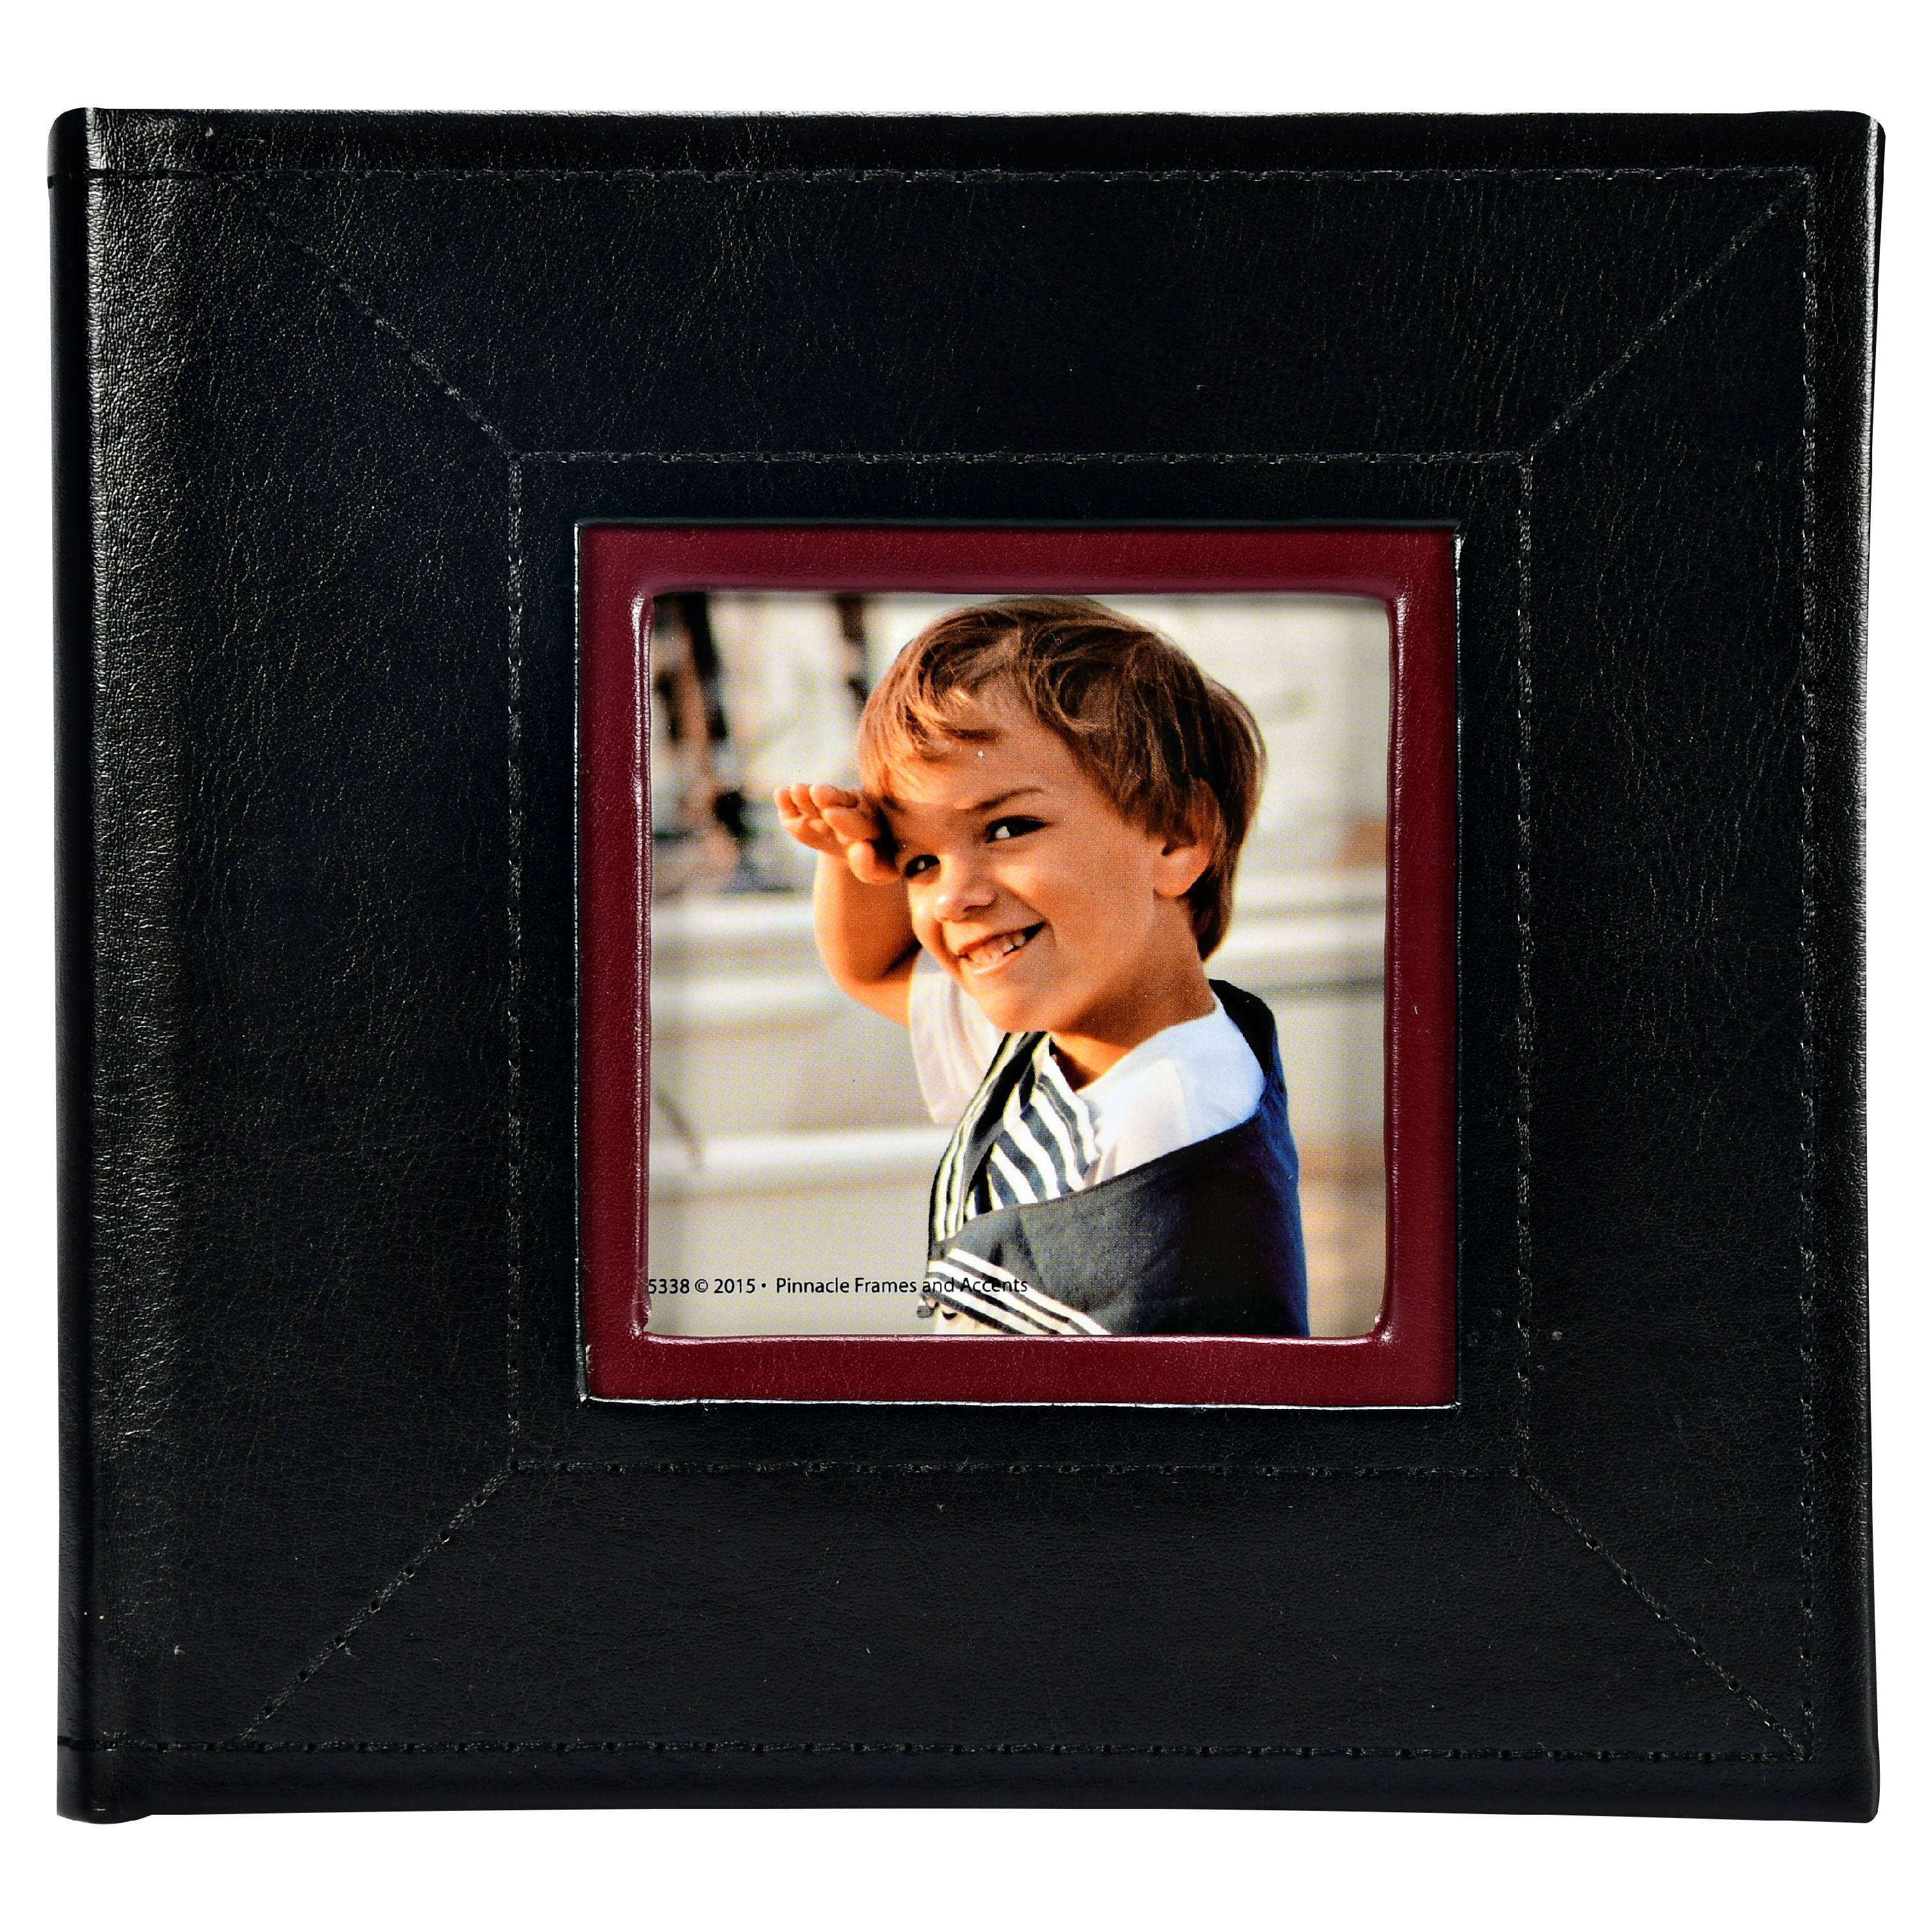 Pinnacle Black Faux Leather Photo Album with Front Cover Window Frame, Holds 60 - 4"x6" photos with memo lines